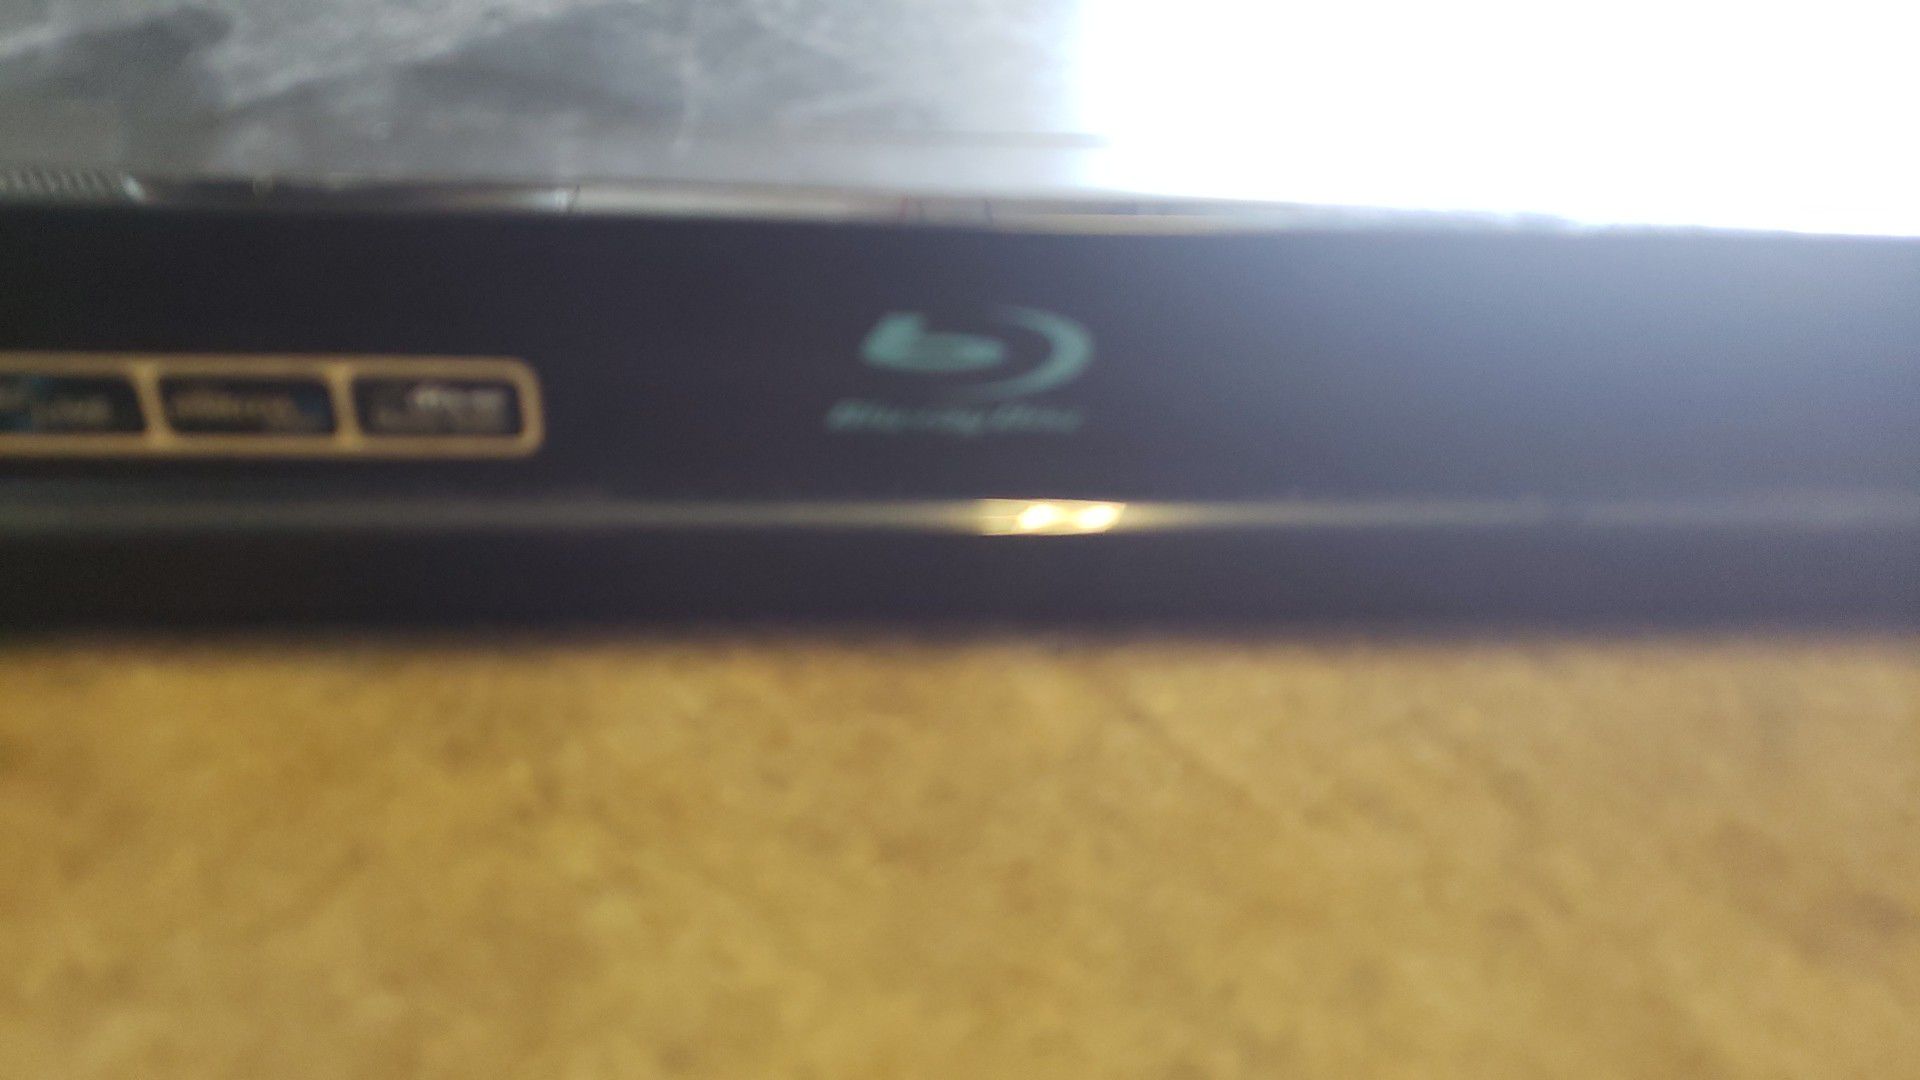 Blue ray dvd player no remote